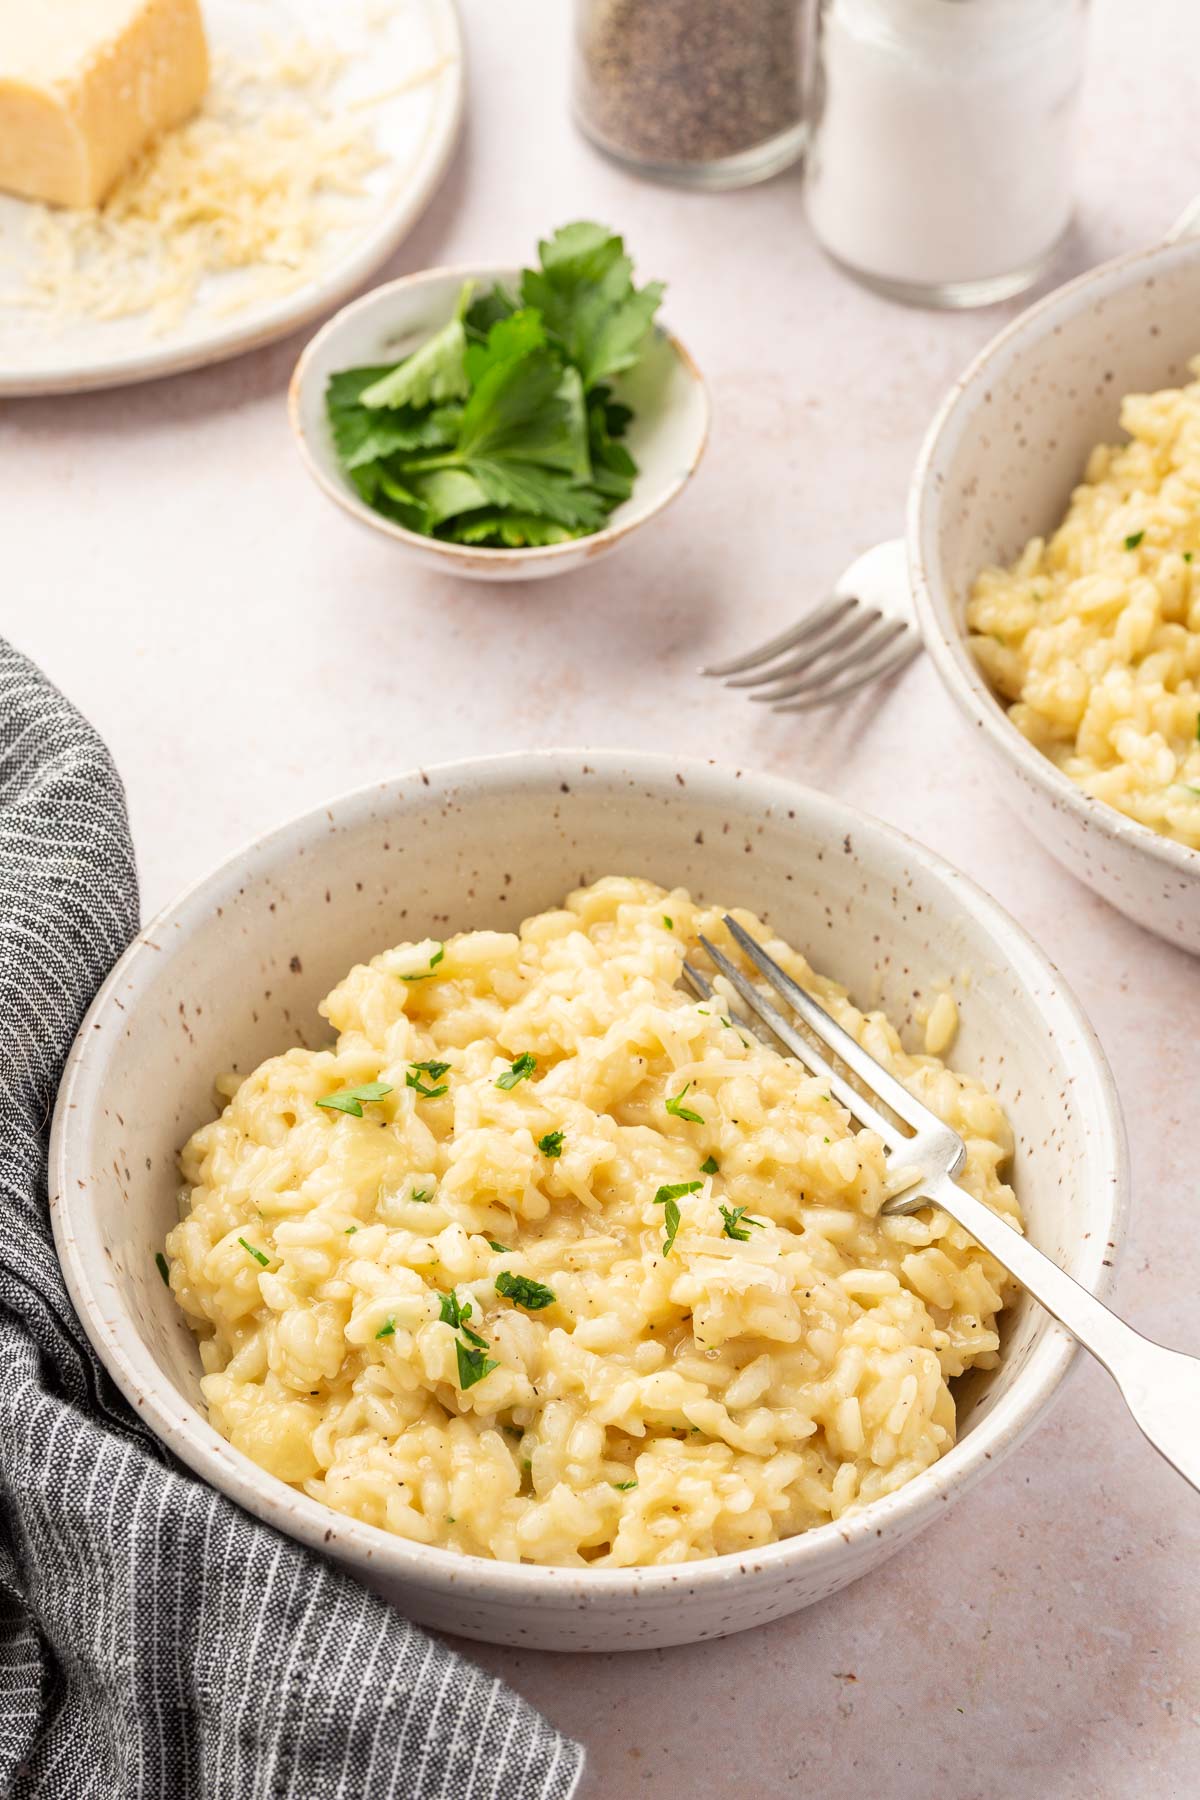 Two bowls of gluten free risotto with forks in them on a table with a small bowl of fresh parsley, a block of parmesan cheese that has been partially shredded, and glass salt and pepper shakers.